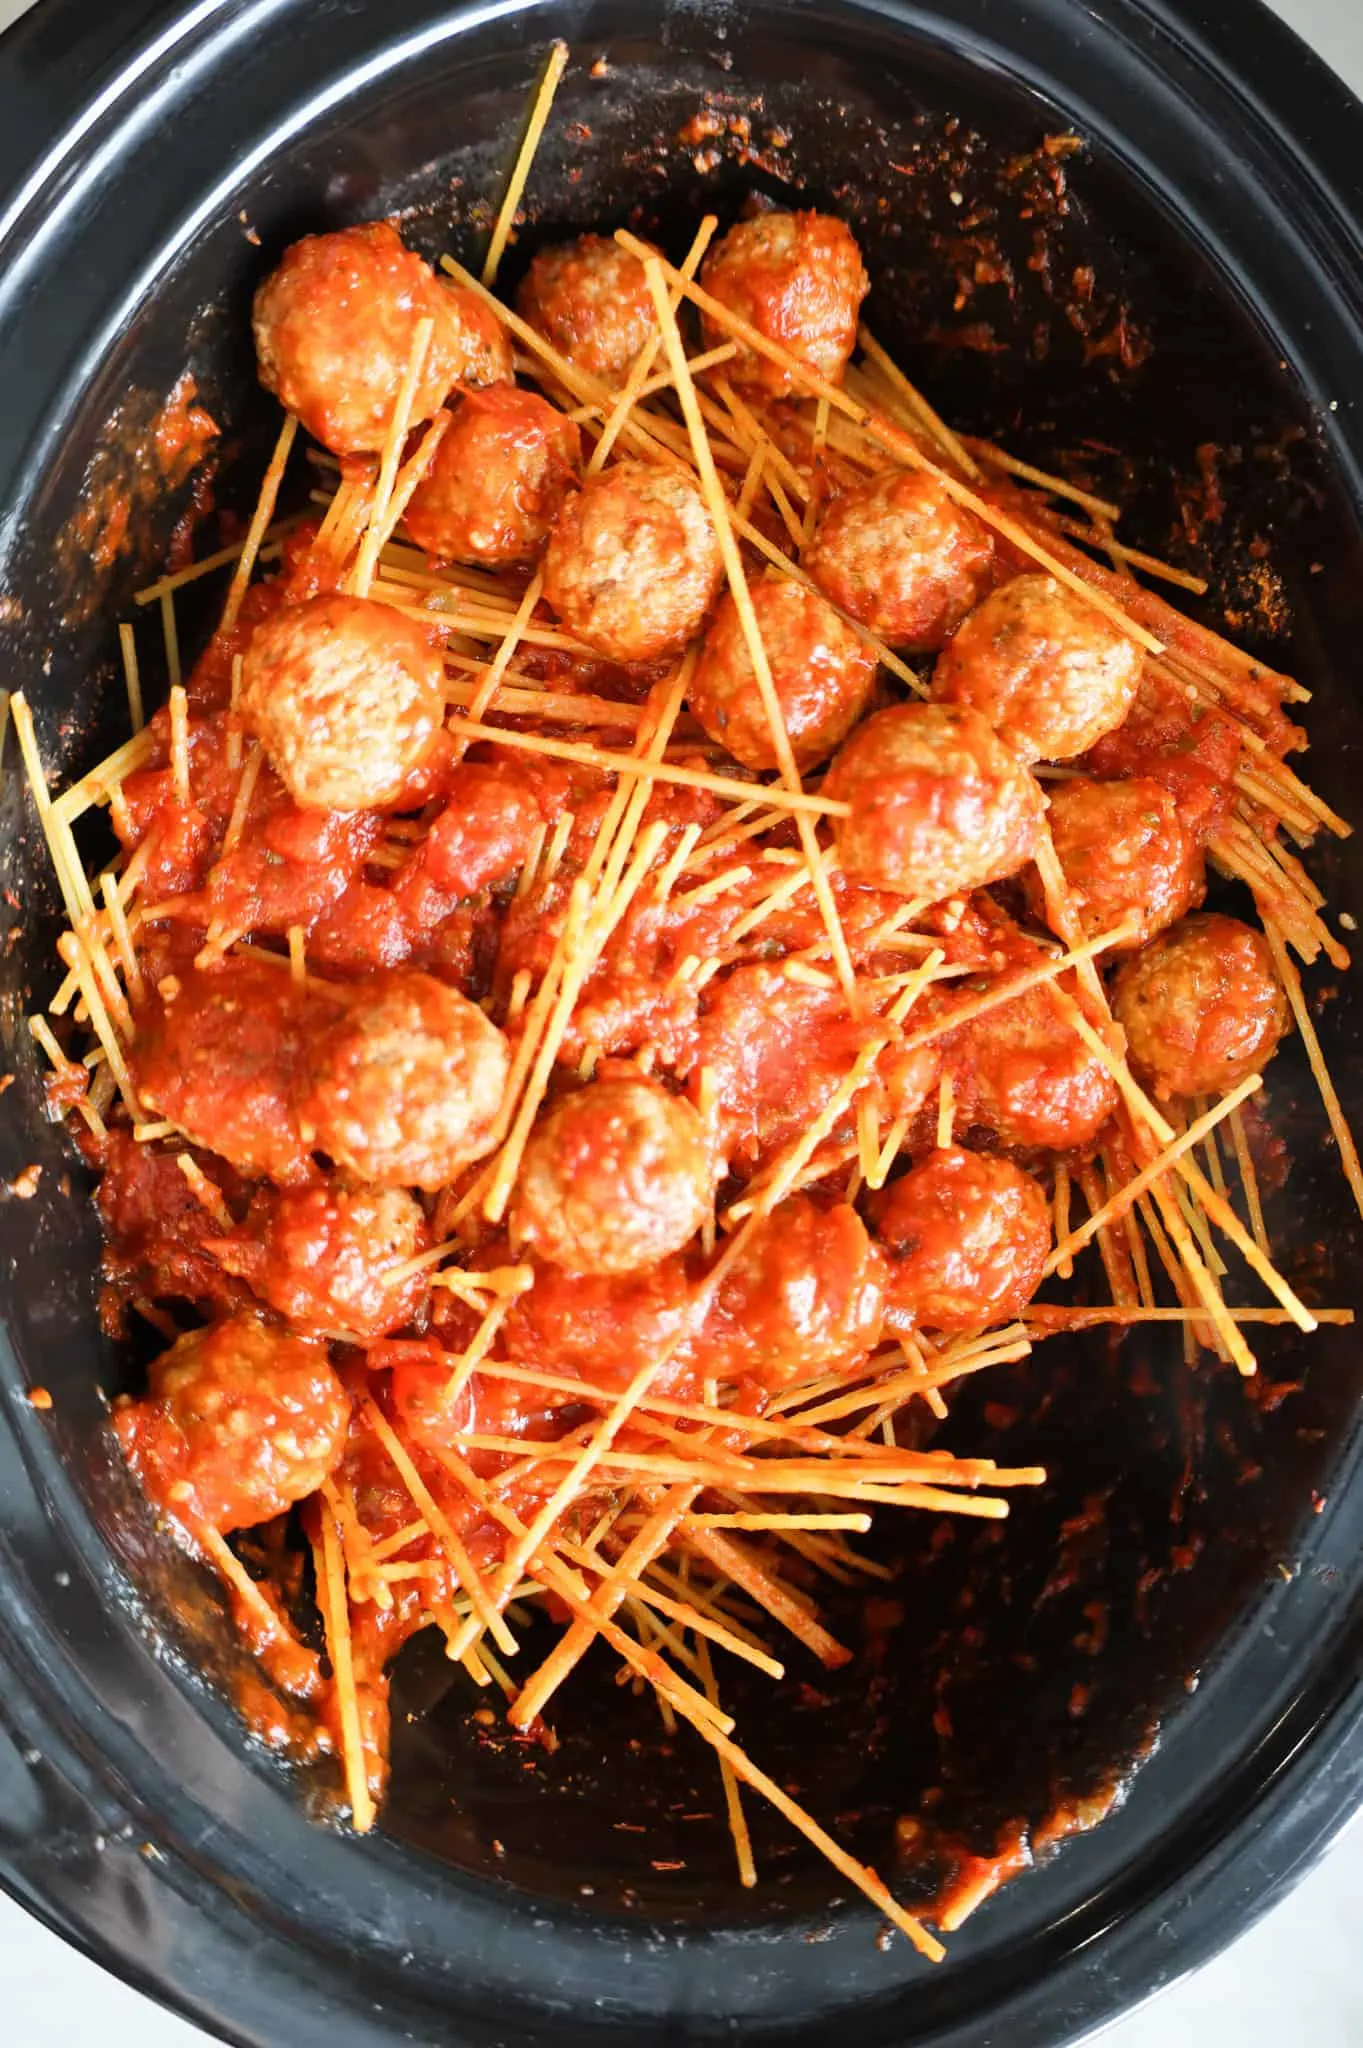 stirring together spaghetti noodles, meatballs and marinara sauce in a Crock pot